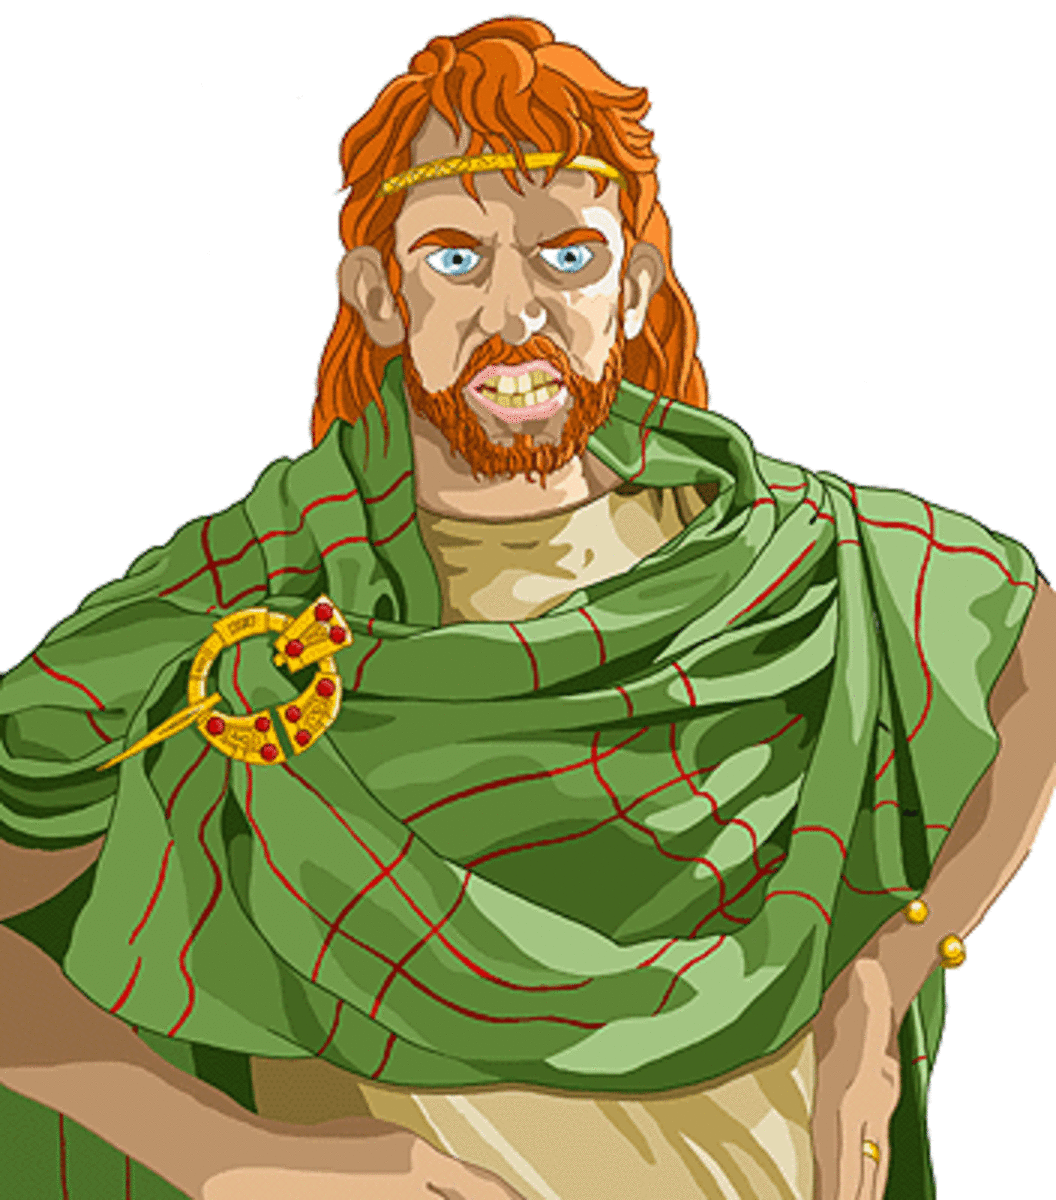 An artist's impression of Fergus mac Roth, king of Ulster and lover of the equally promiscuous Medb, Queen of Connacht